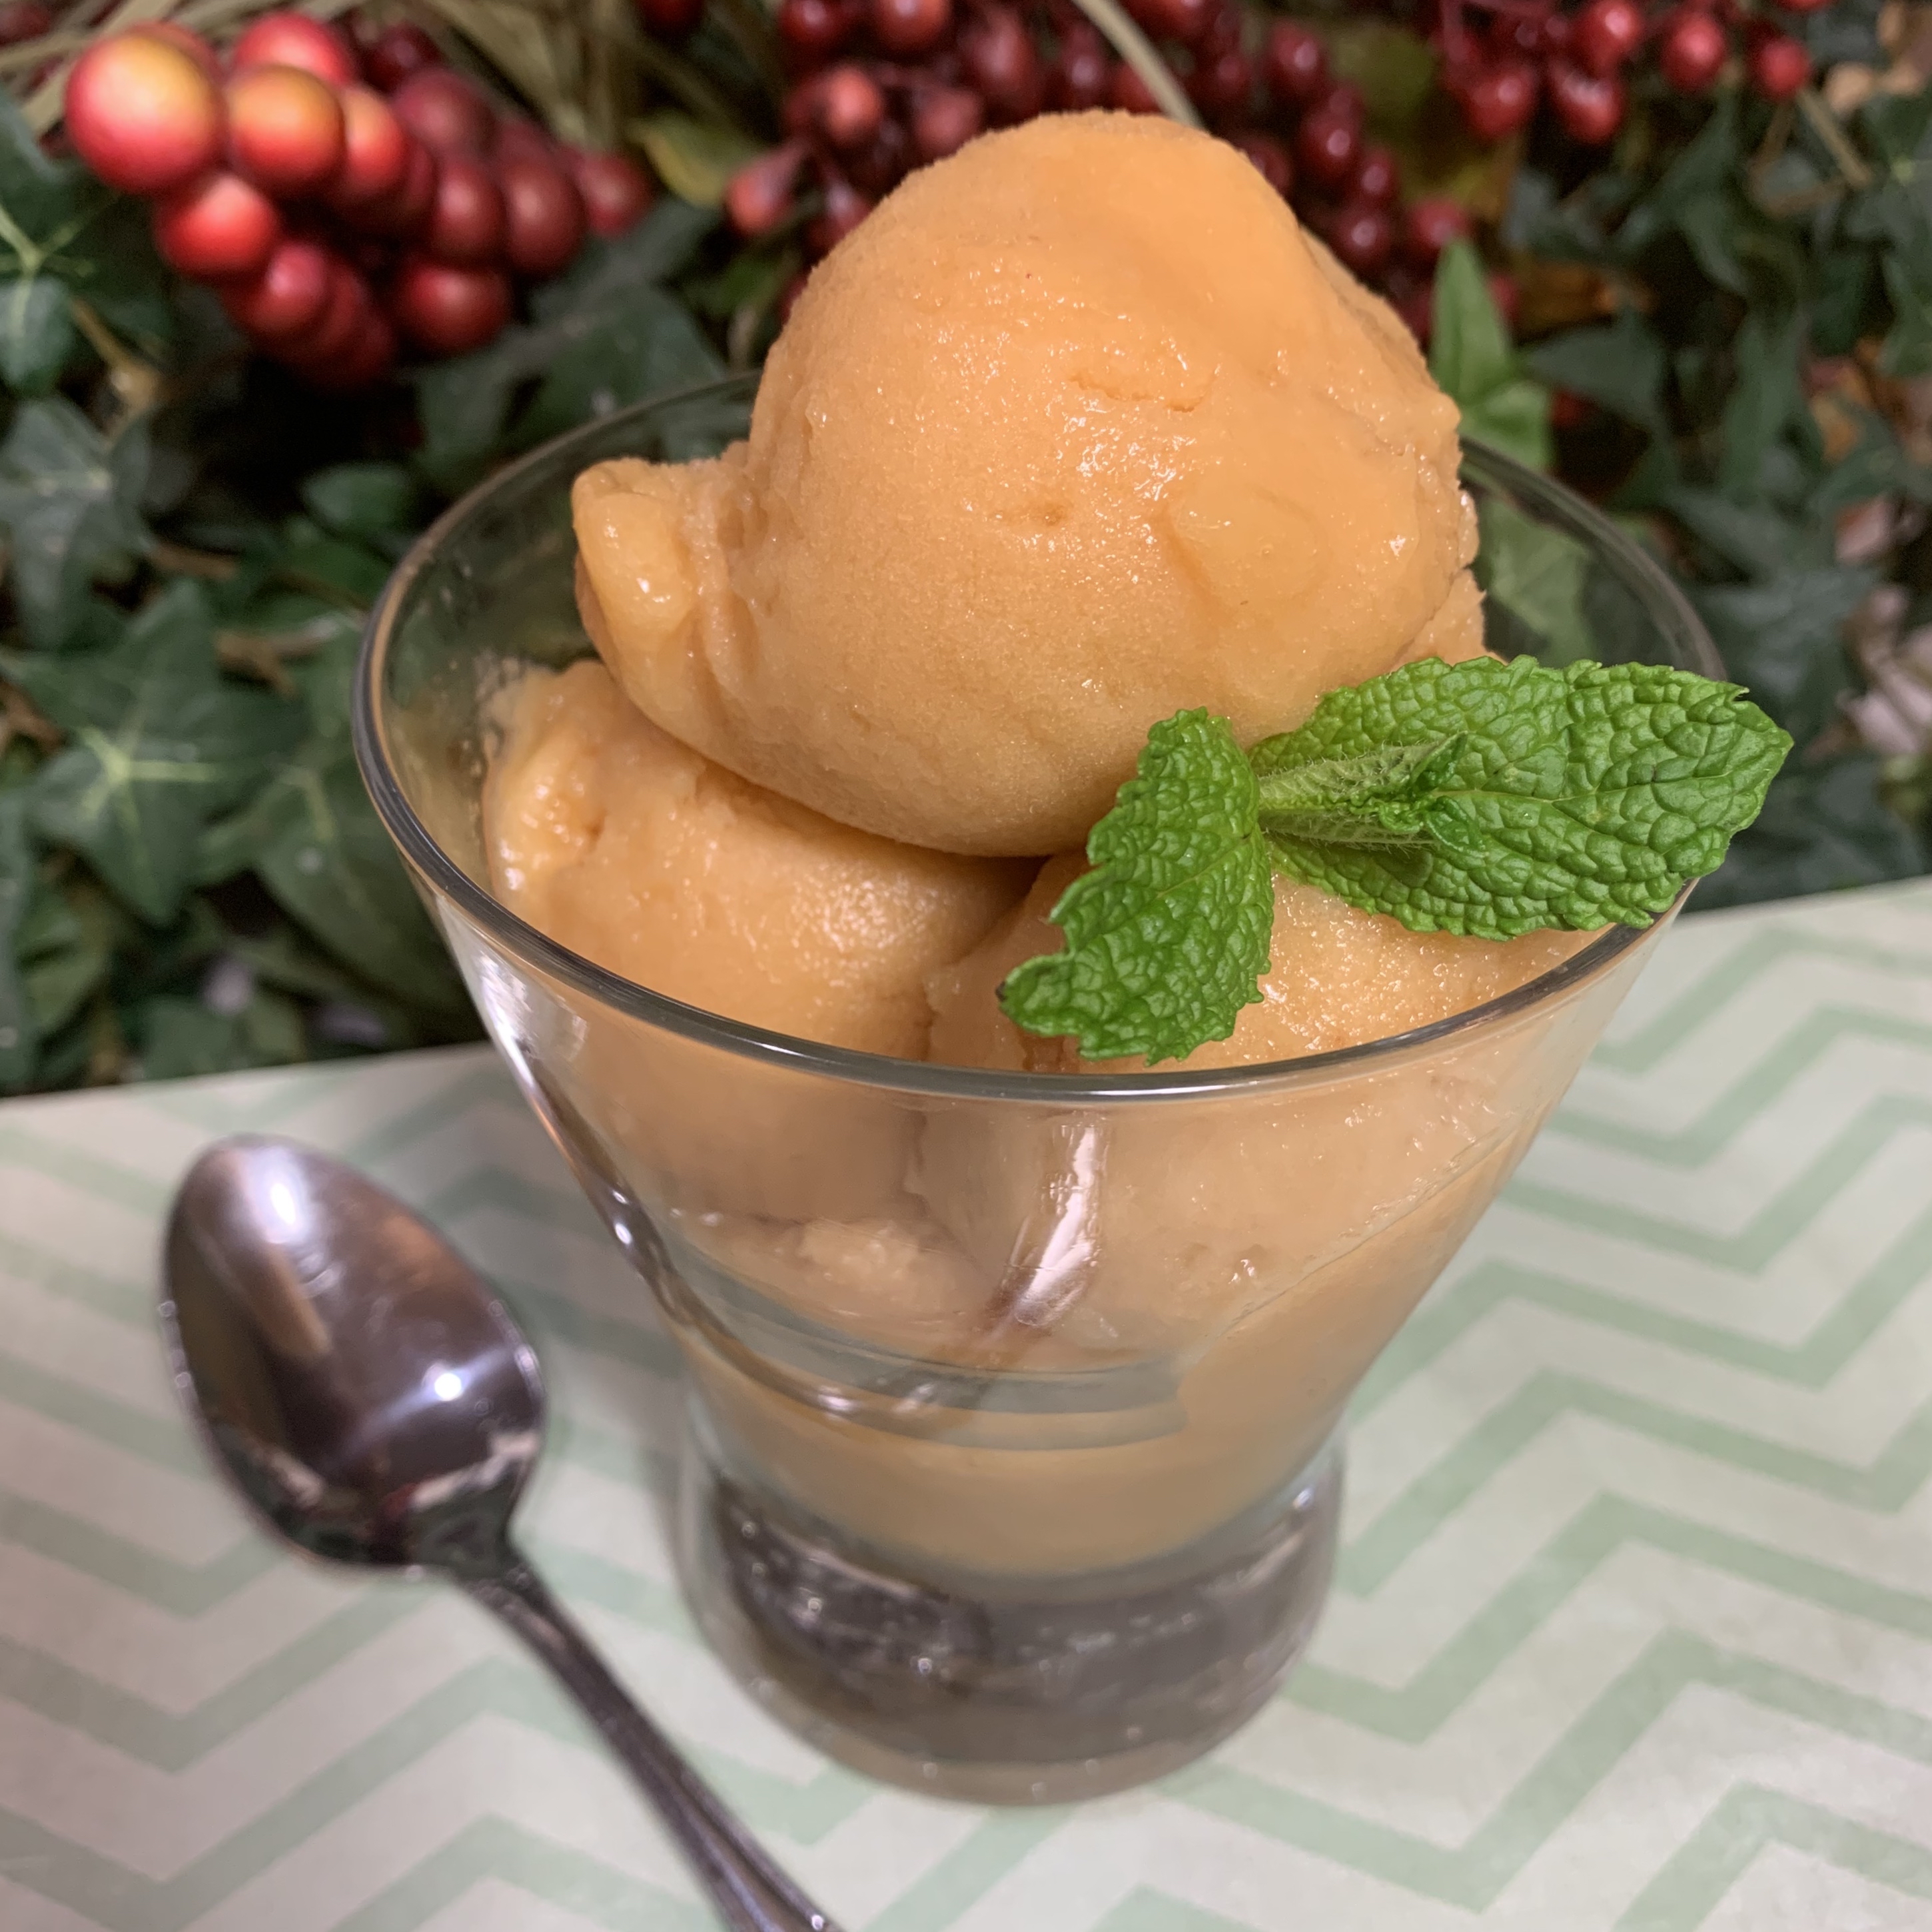 Peach And Pineapple Sorbet Recipe Allrecipes,Micro Jobs Meaning